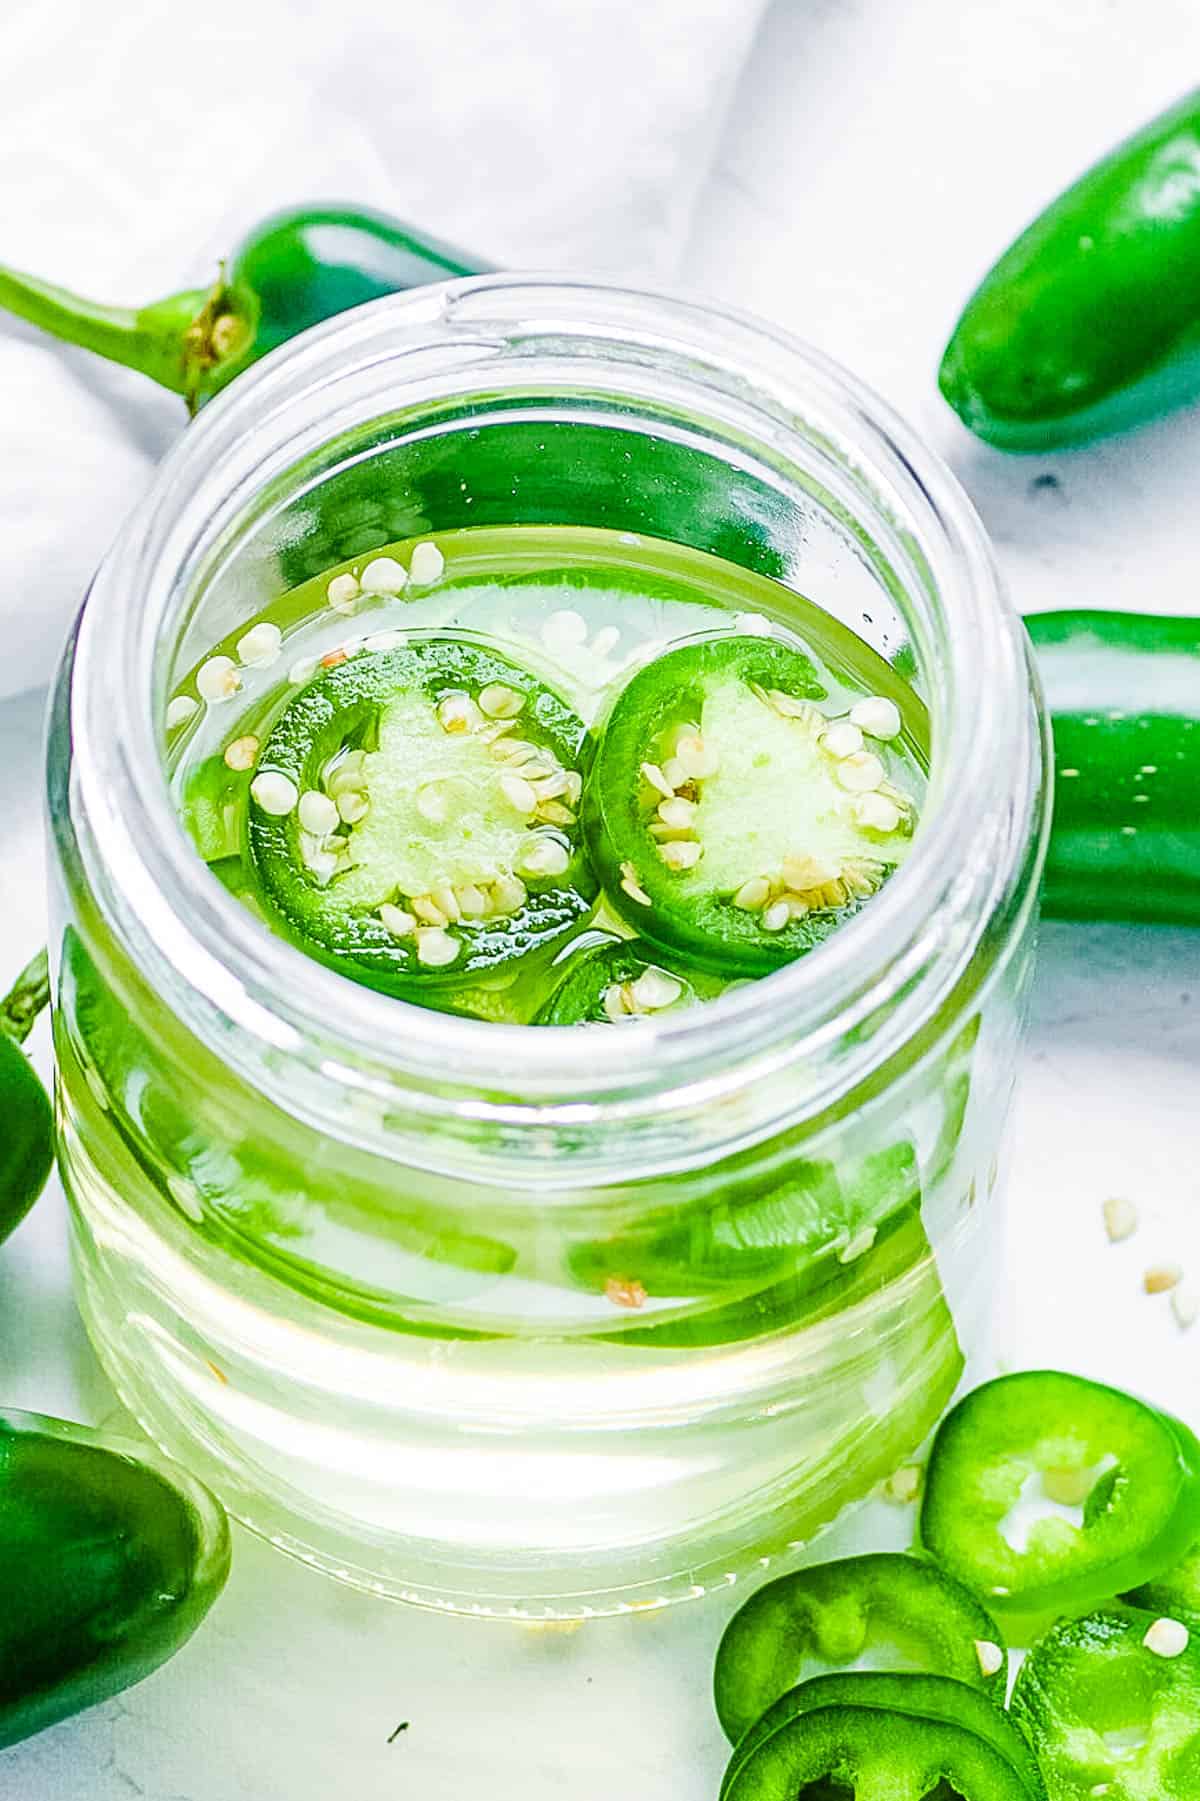 Jalapeno simple syrup in a glass mason jar, garnished with jalapeno slices.